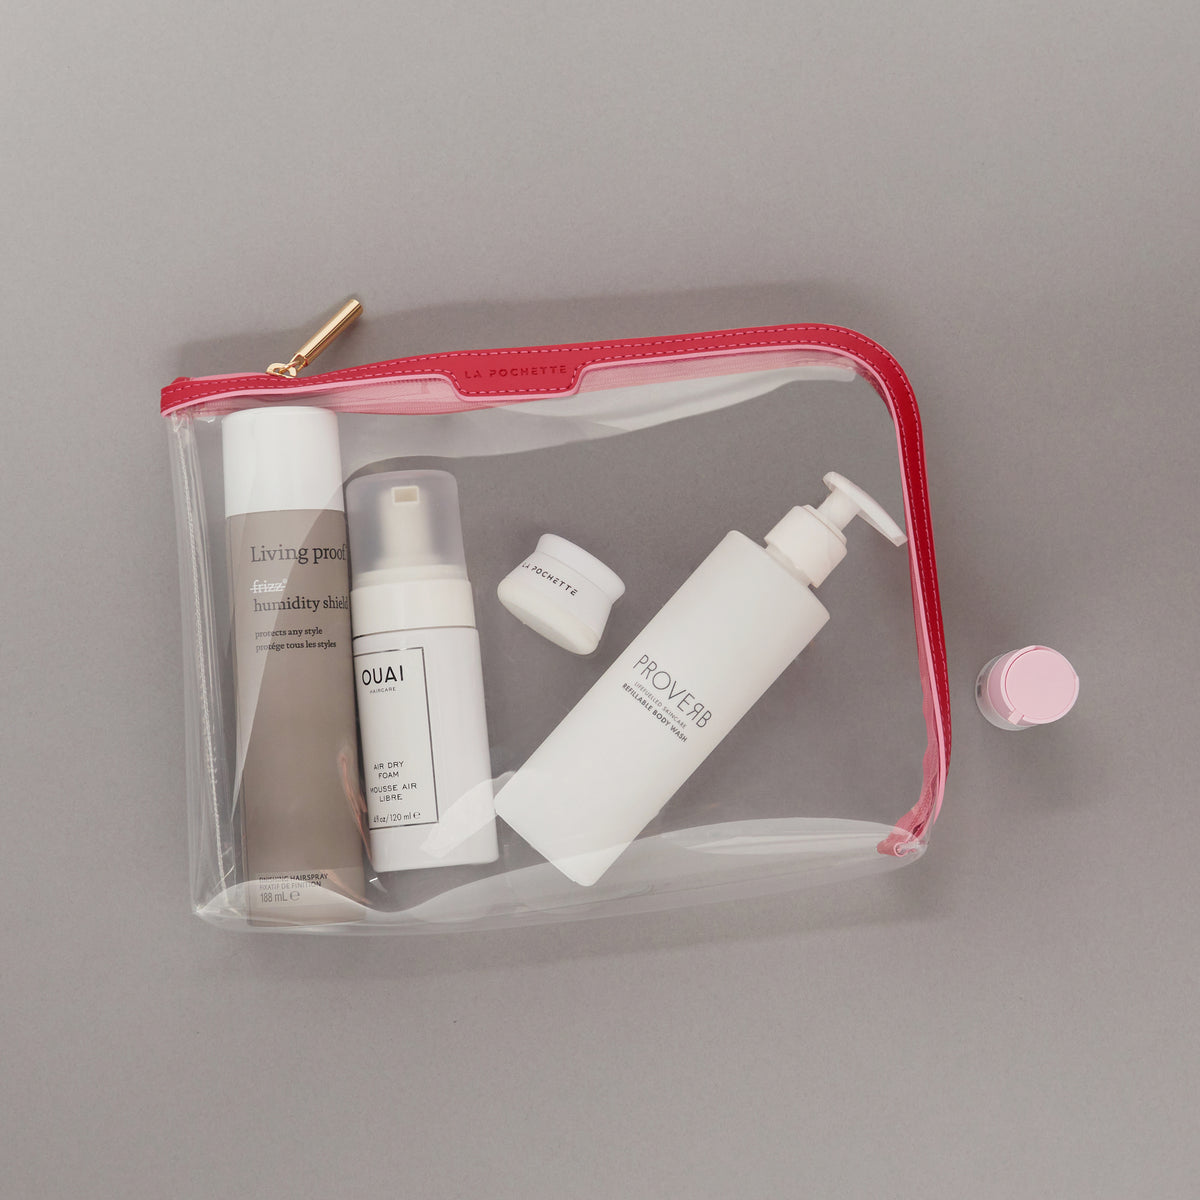 Large Anywhere Everywhere Pouch in Cashmere White colourway holding beauty products